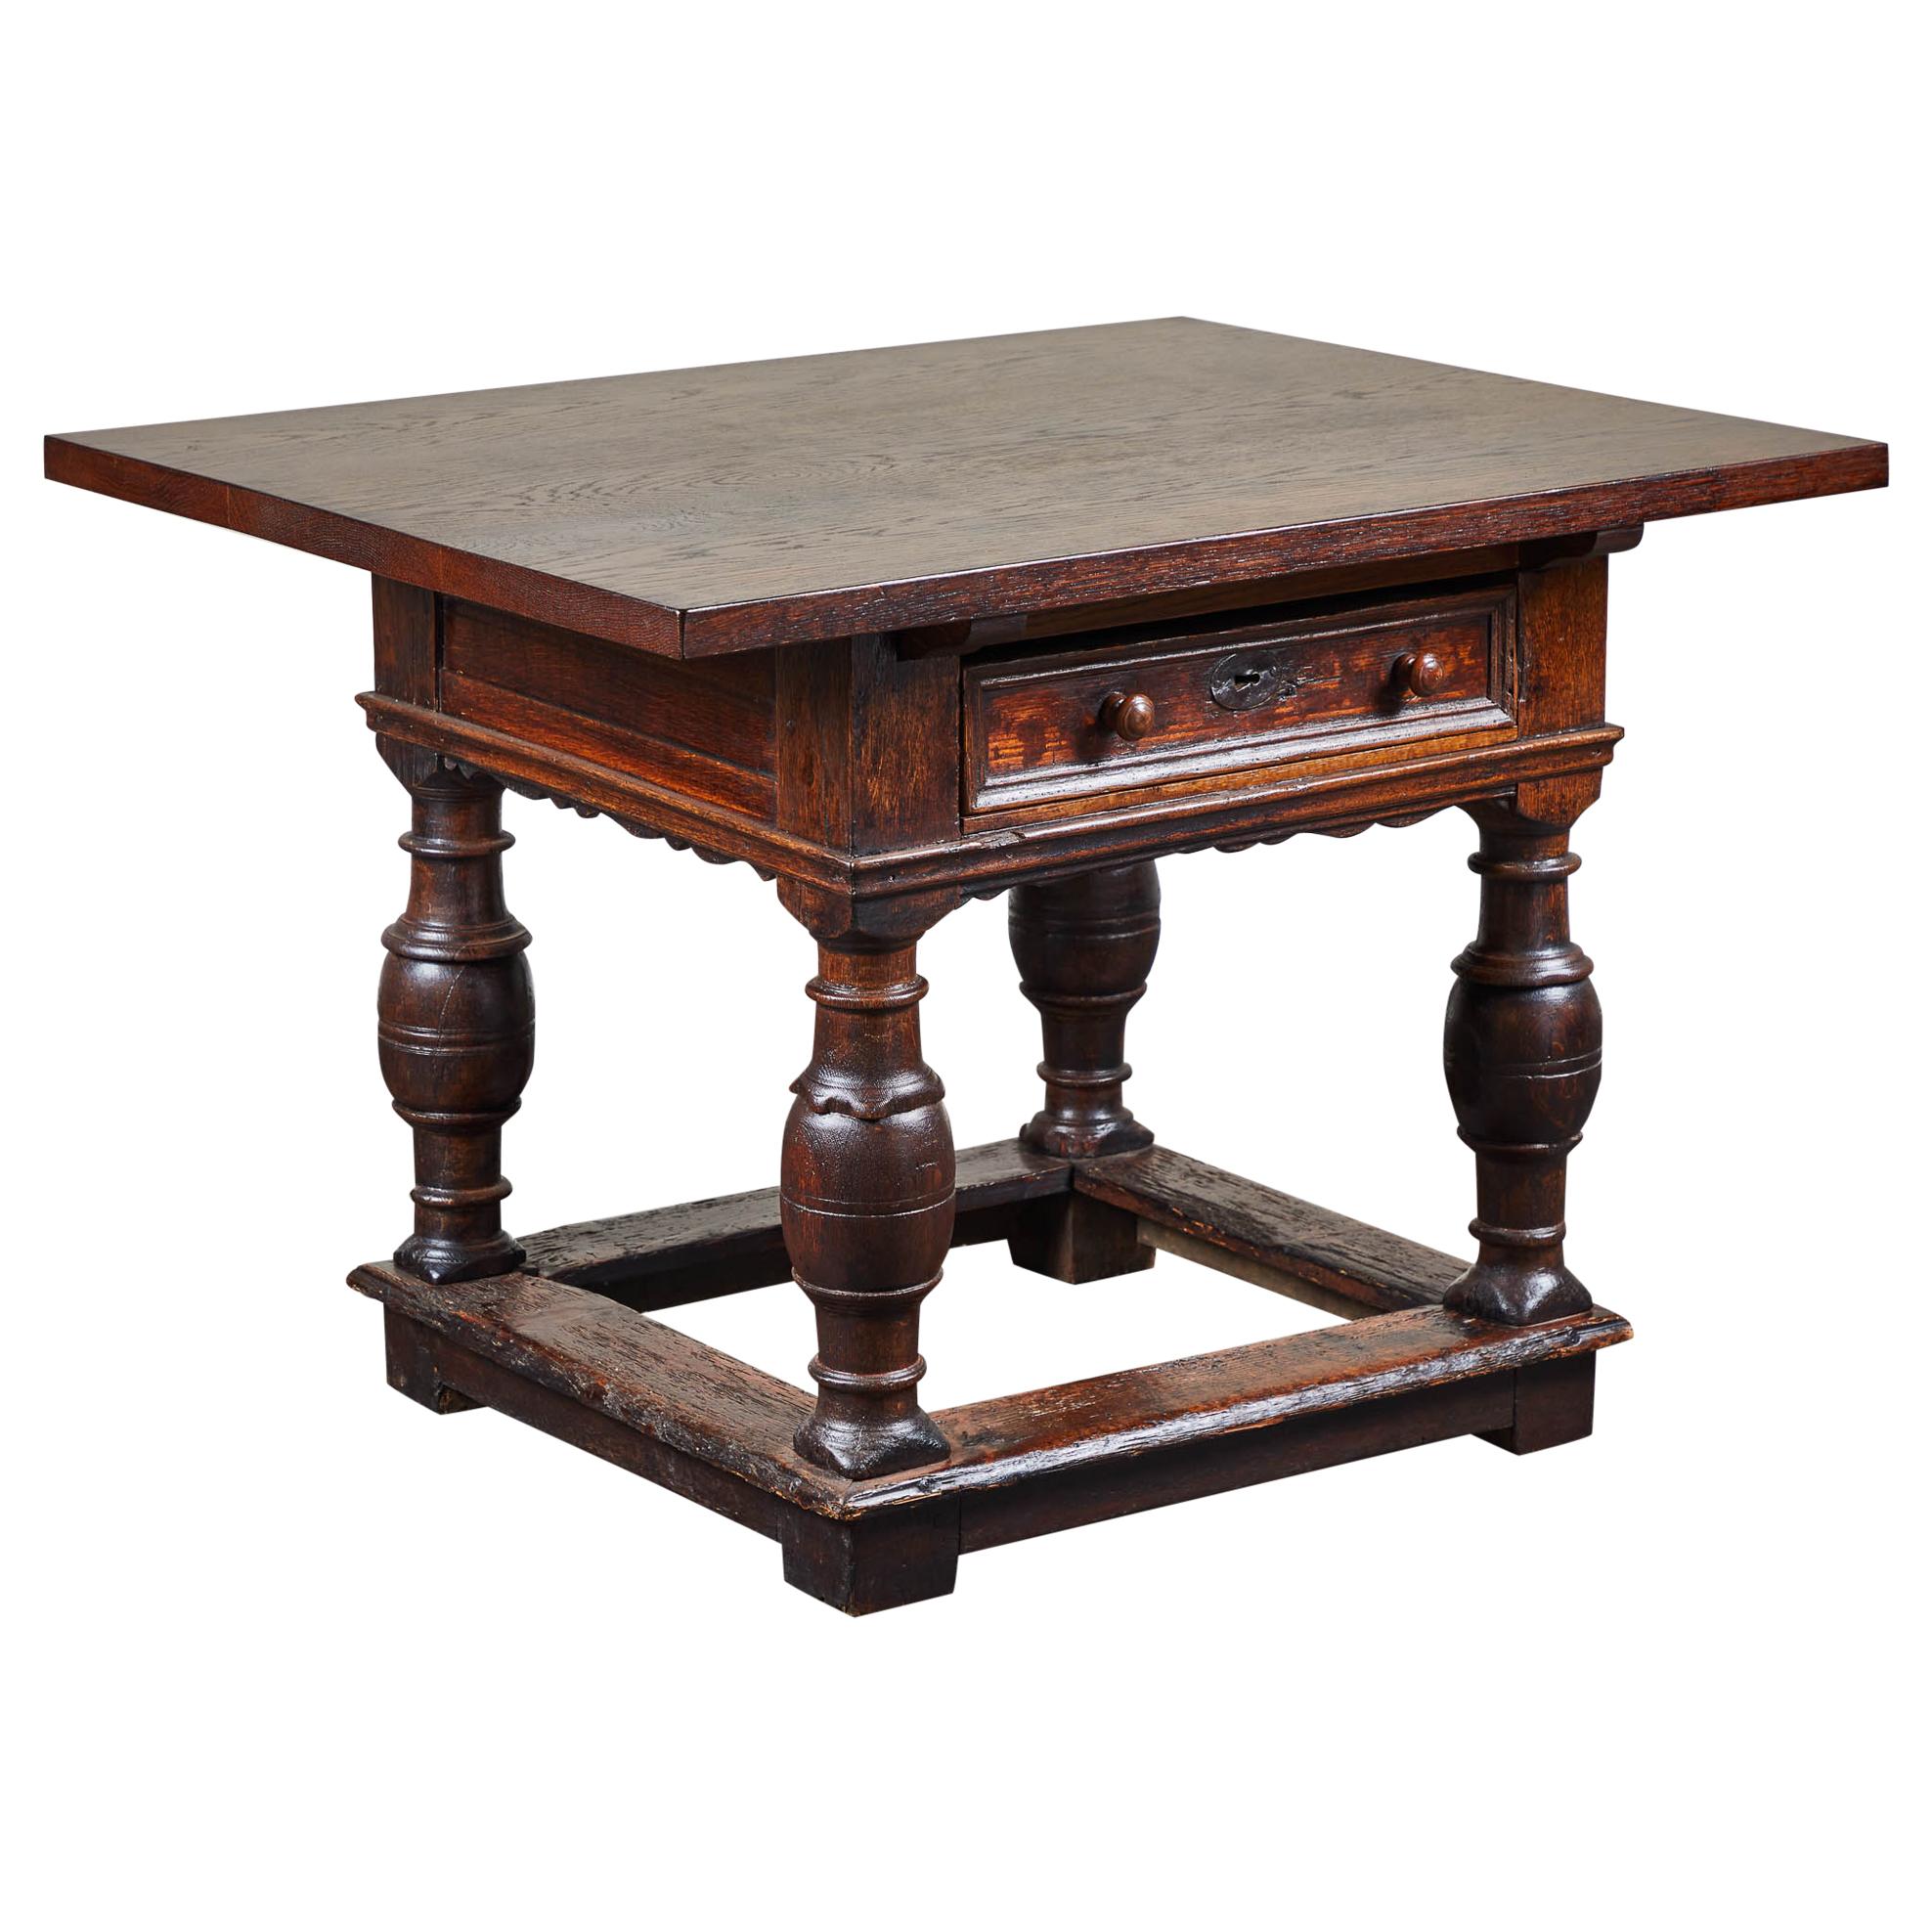 18th Century Danish Baroque Table with Turned Legs